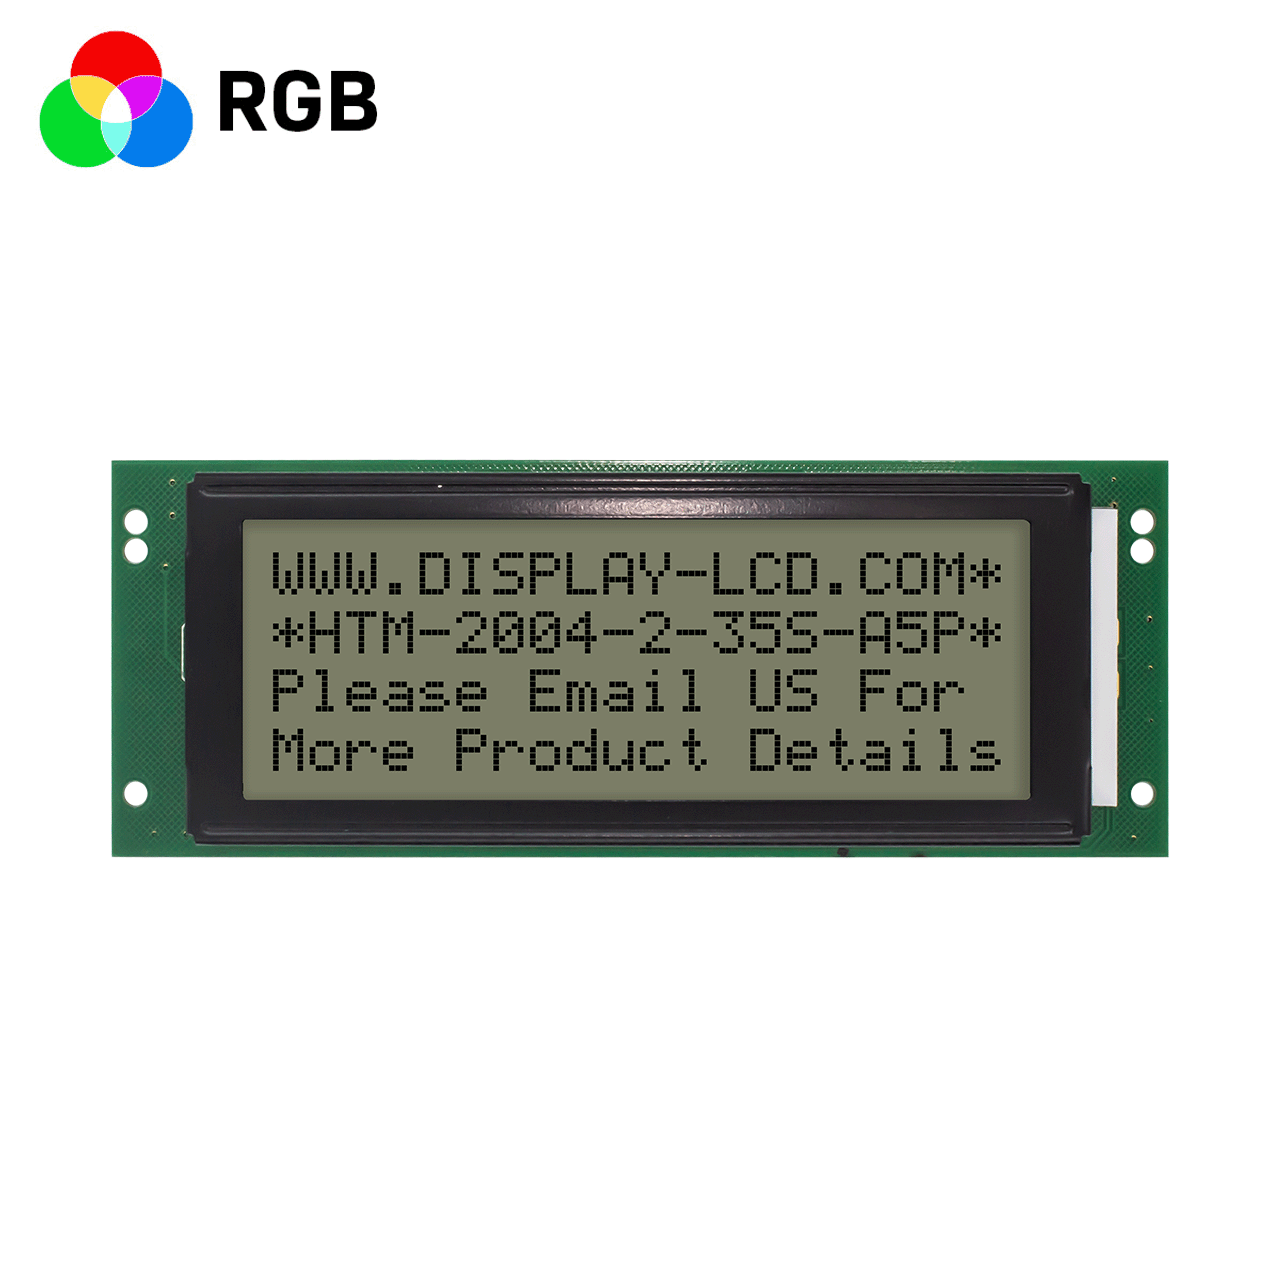 4X20 RGB character LCD module/FSTN positive display/with red, green and blue backlight/Arduino/full transflective LCD display/5.0v